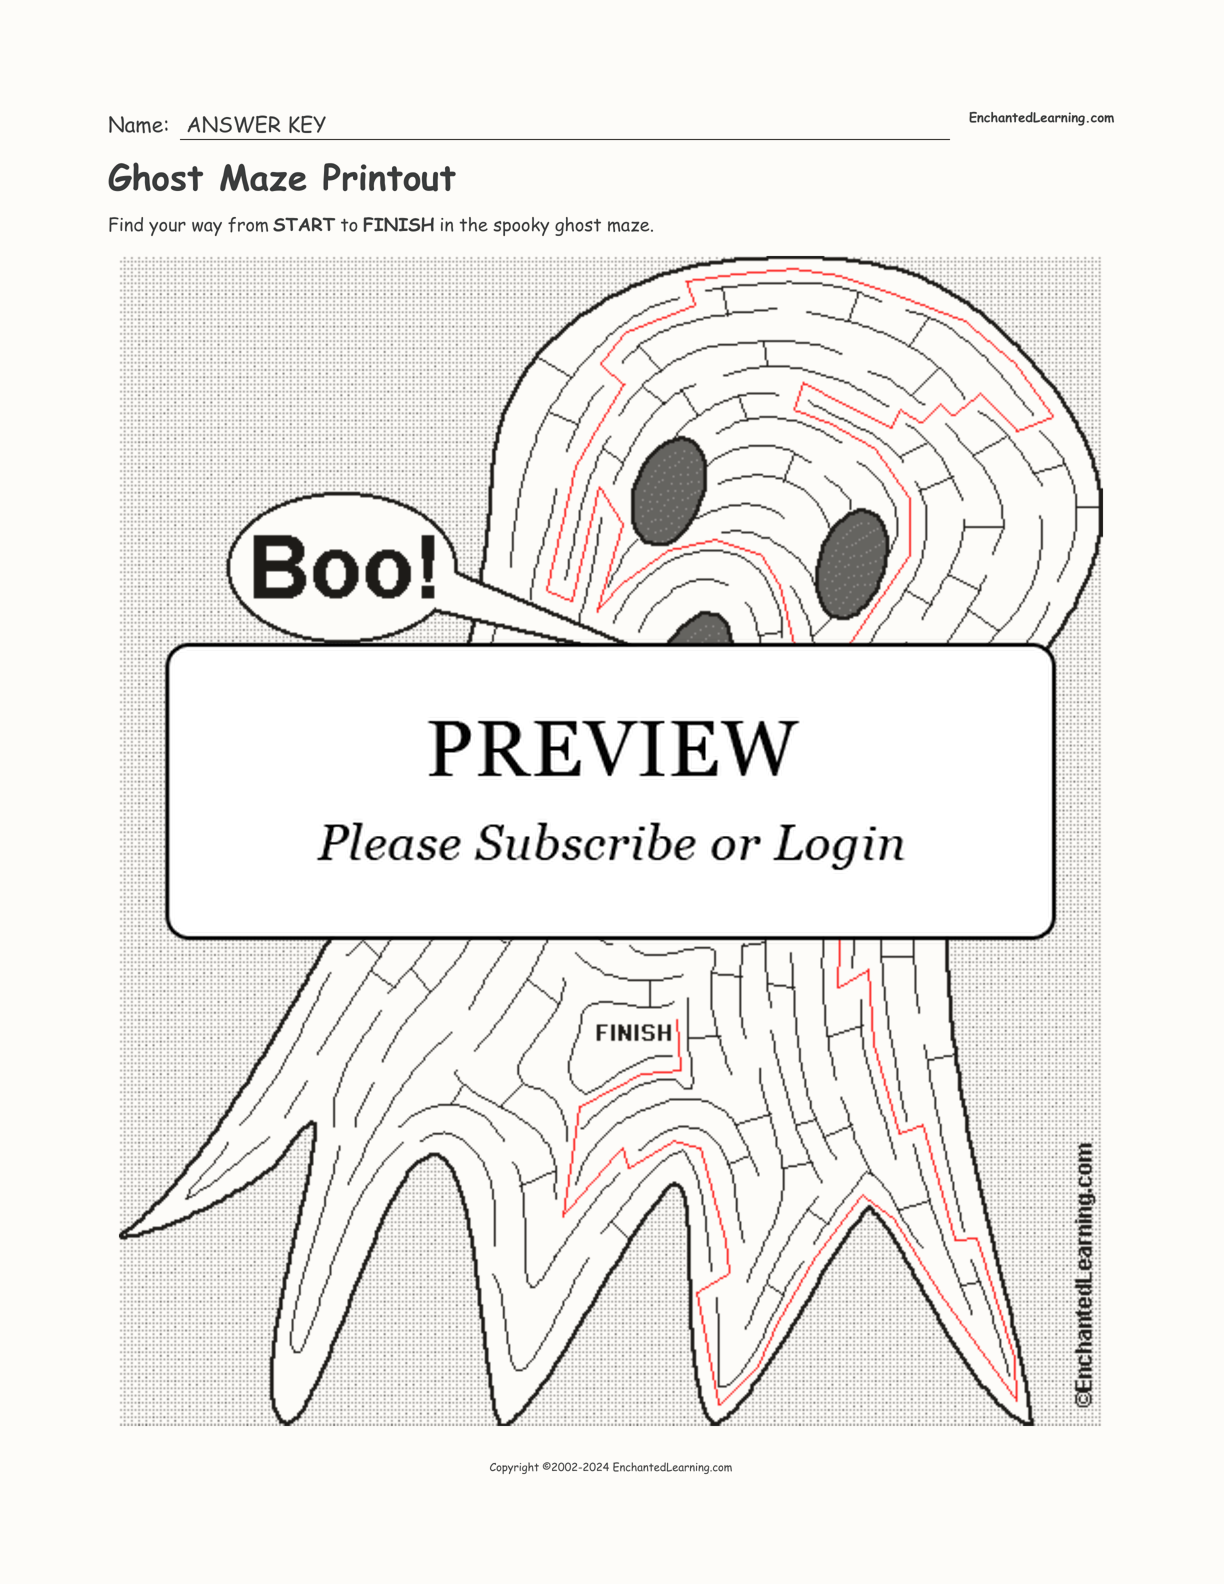 Ghost Maze Printout interactive worksheet page 2